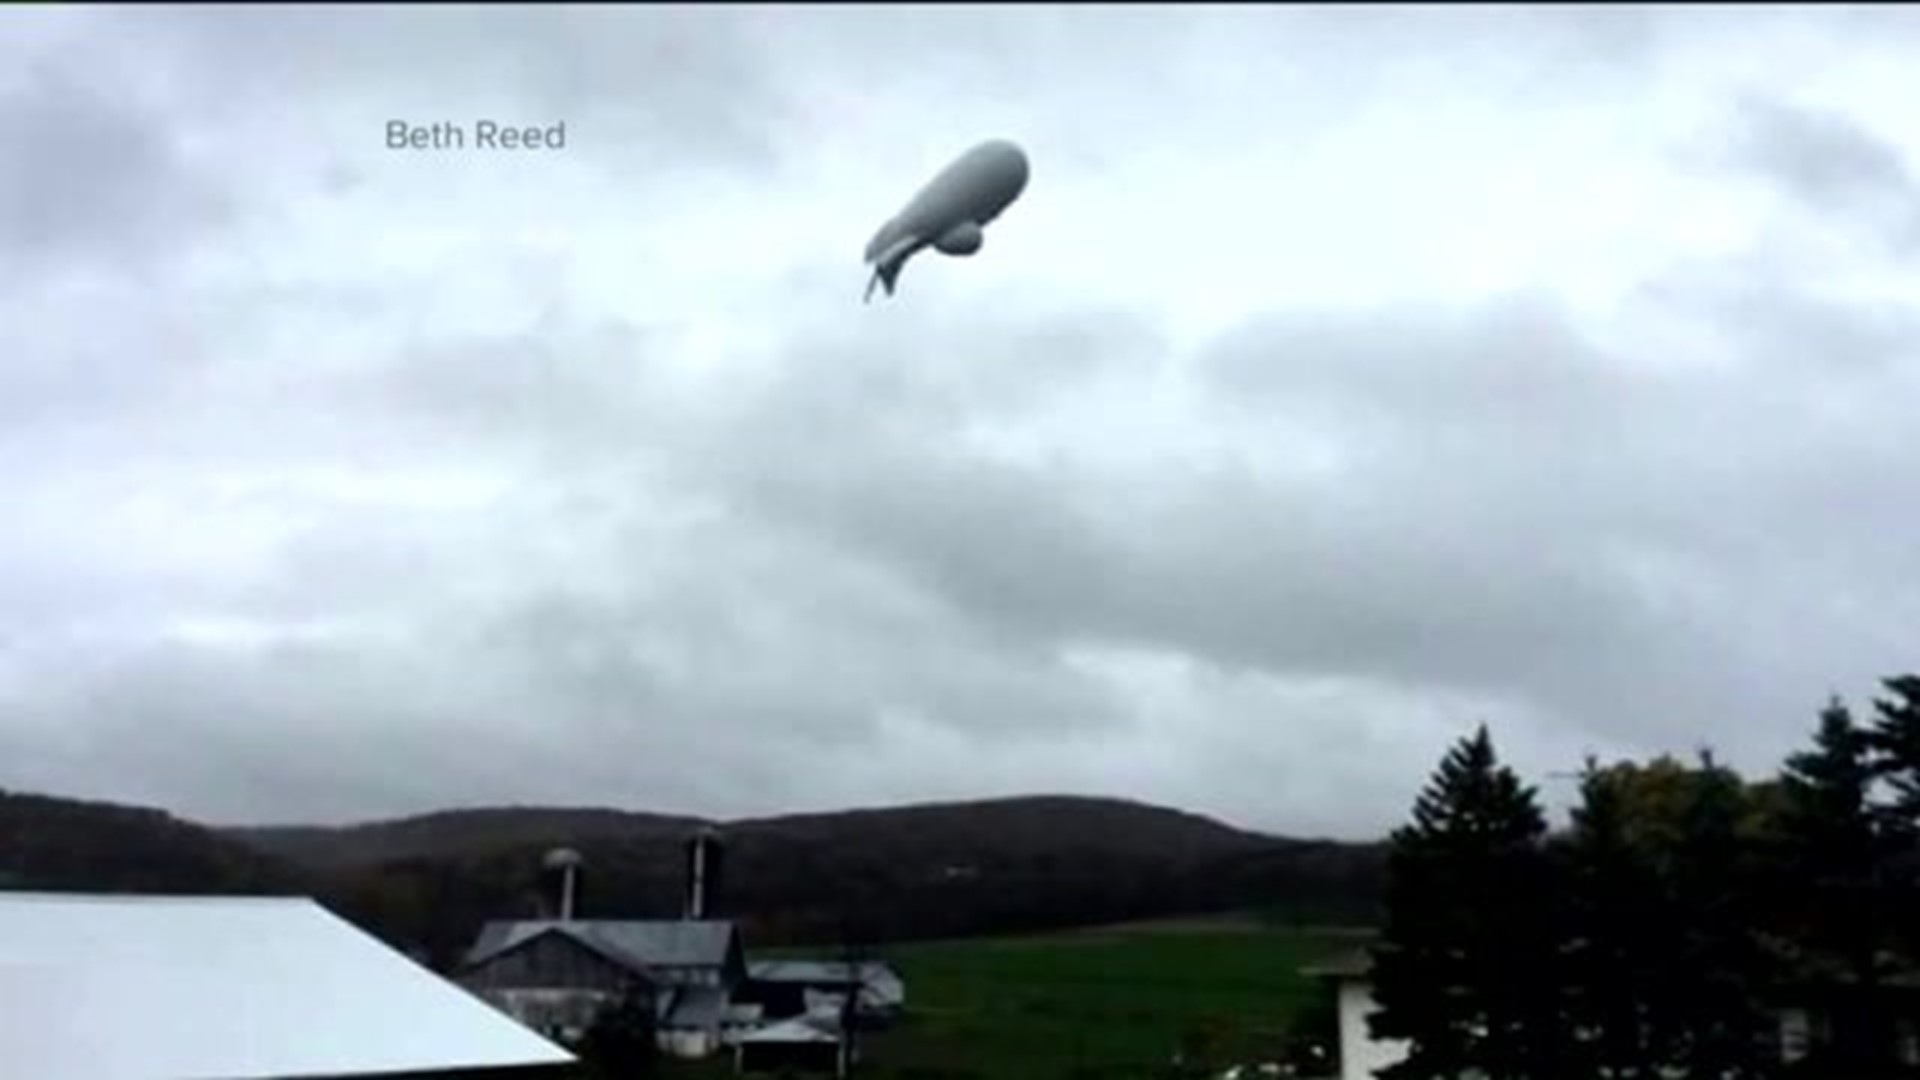 NORAD: Mechanical Failure Caused Blimp to Break Free